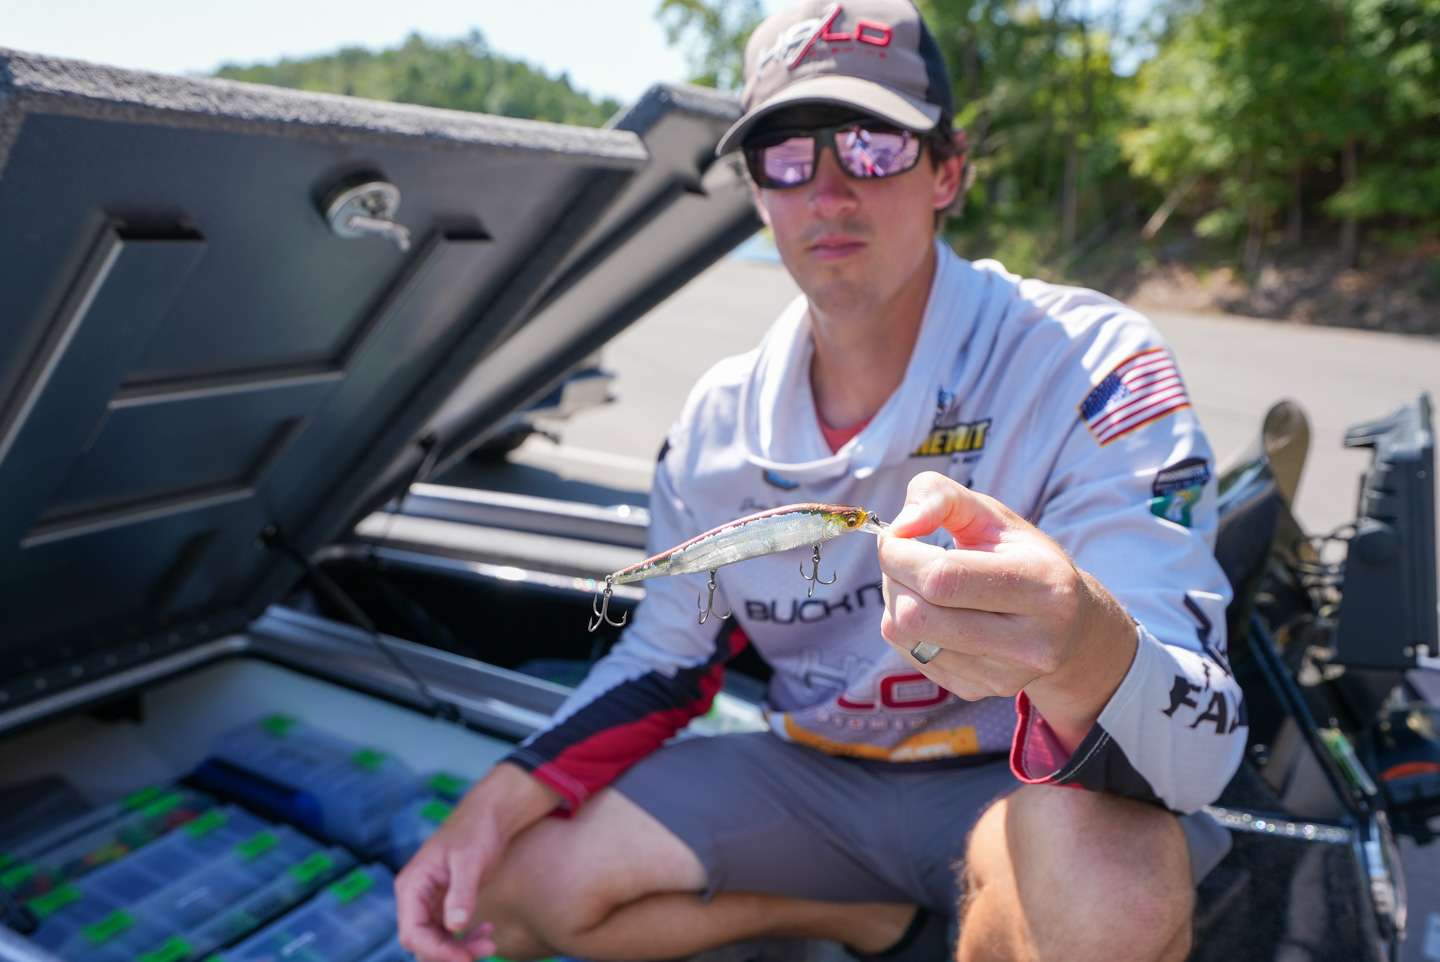 He shows off one of his favorites â a Megabass Ito Shiner. You can tell this bait has caught a few.